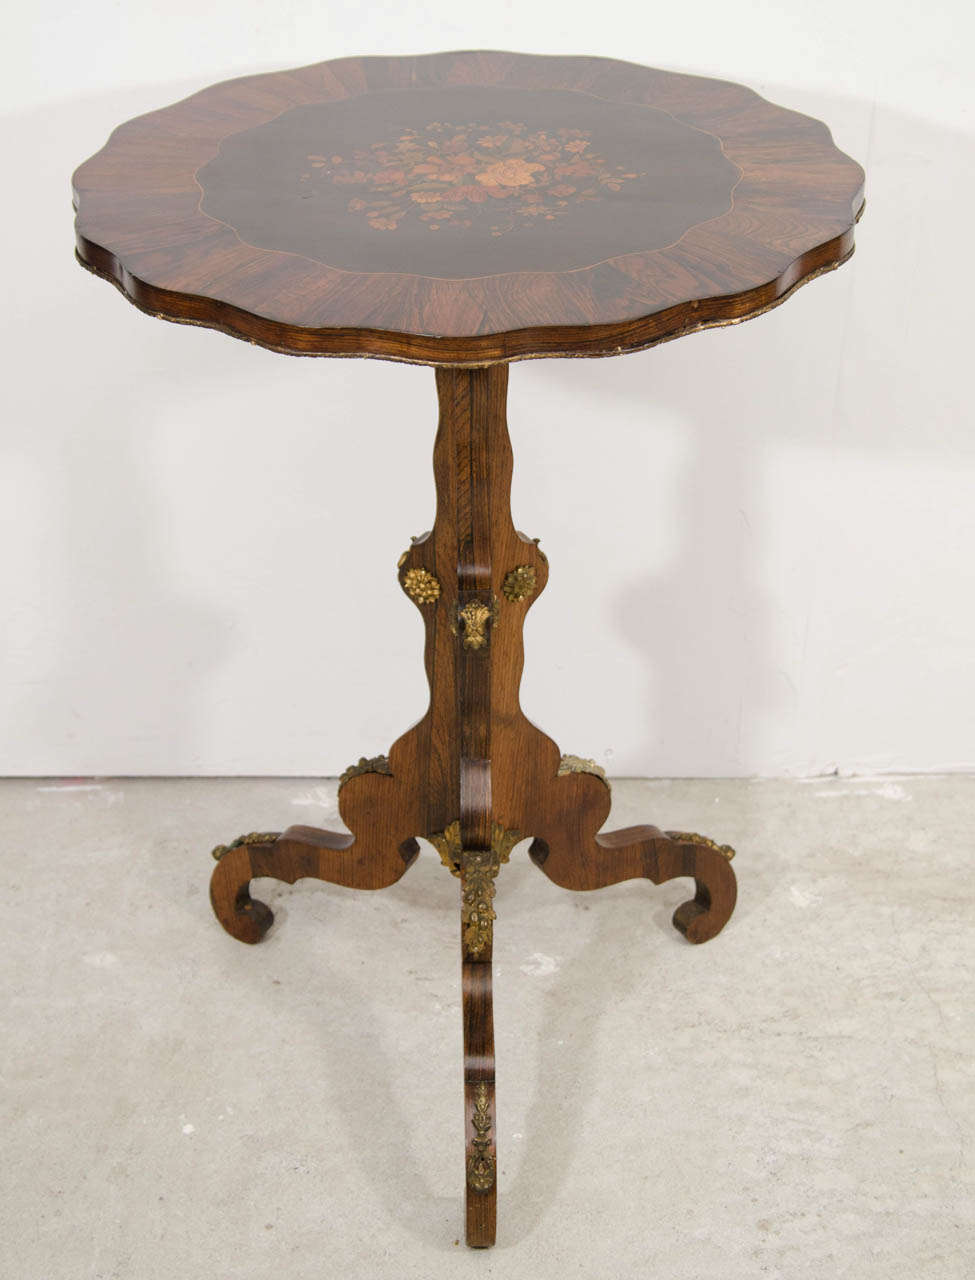 A British ,breakfast table, rosewood marquetry inlaid in the center of the table with  brass decorating the edge and the legs.